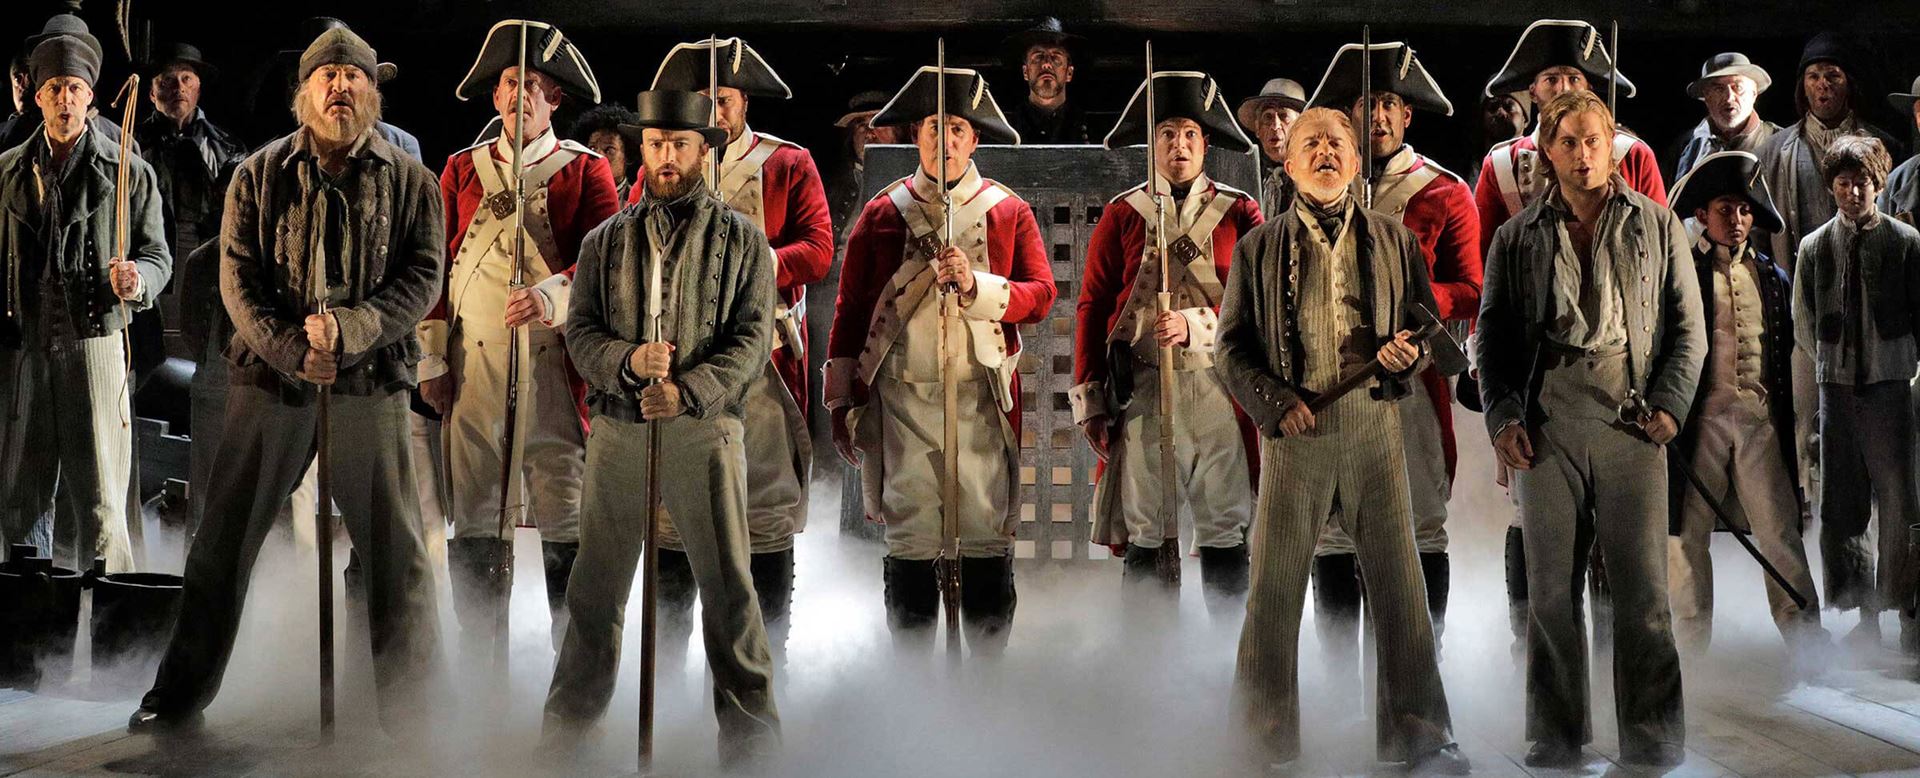 Billy Budd Opera cast in military uniforms standing at attention